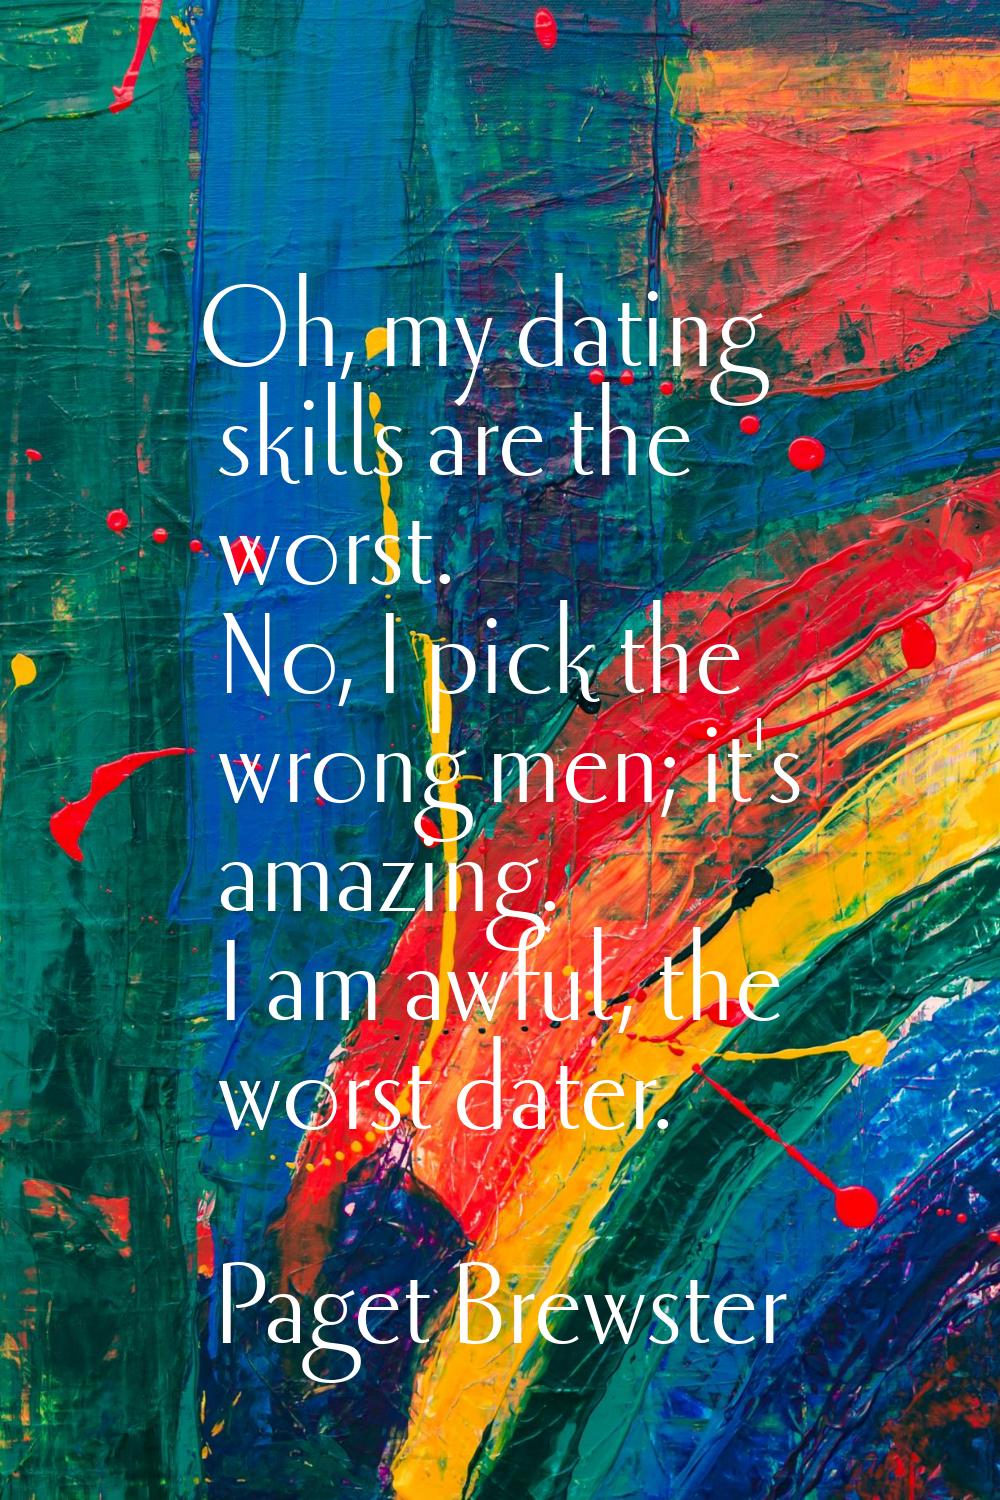 Oh, my dating skills are the worst. No, I pick the wrong men; it's amazing. I am awful, the worst d